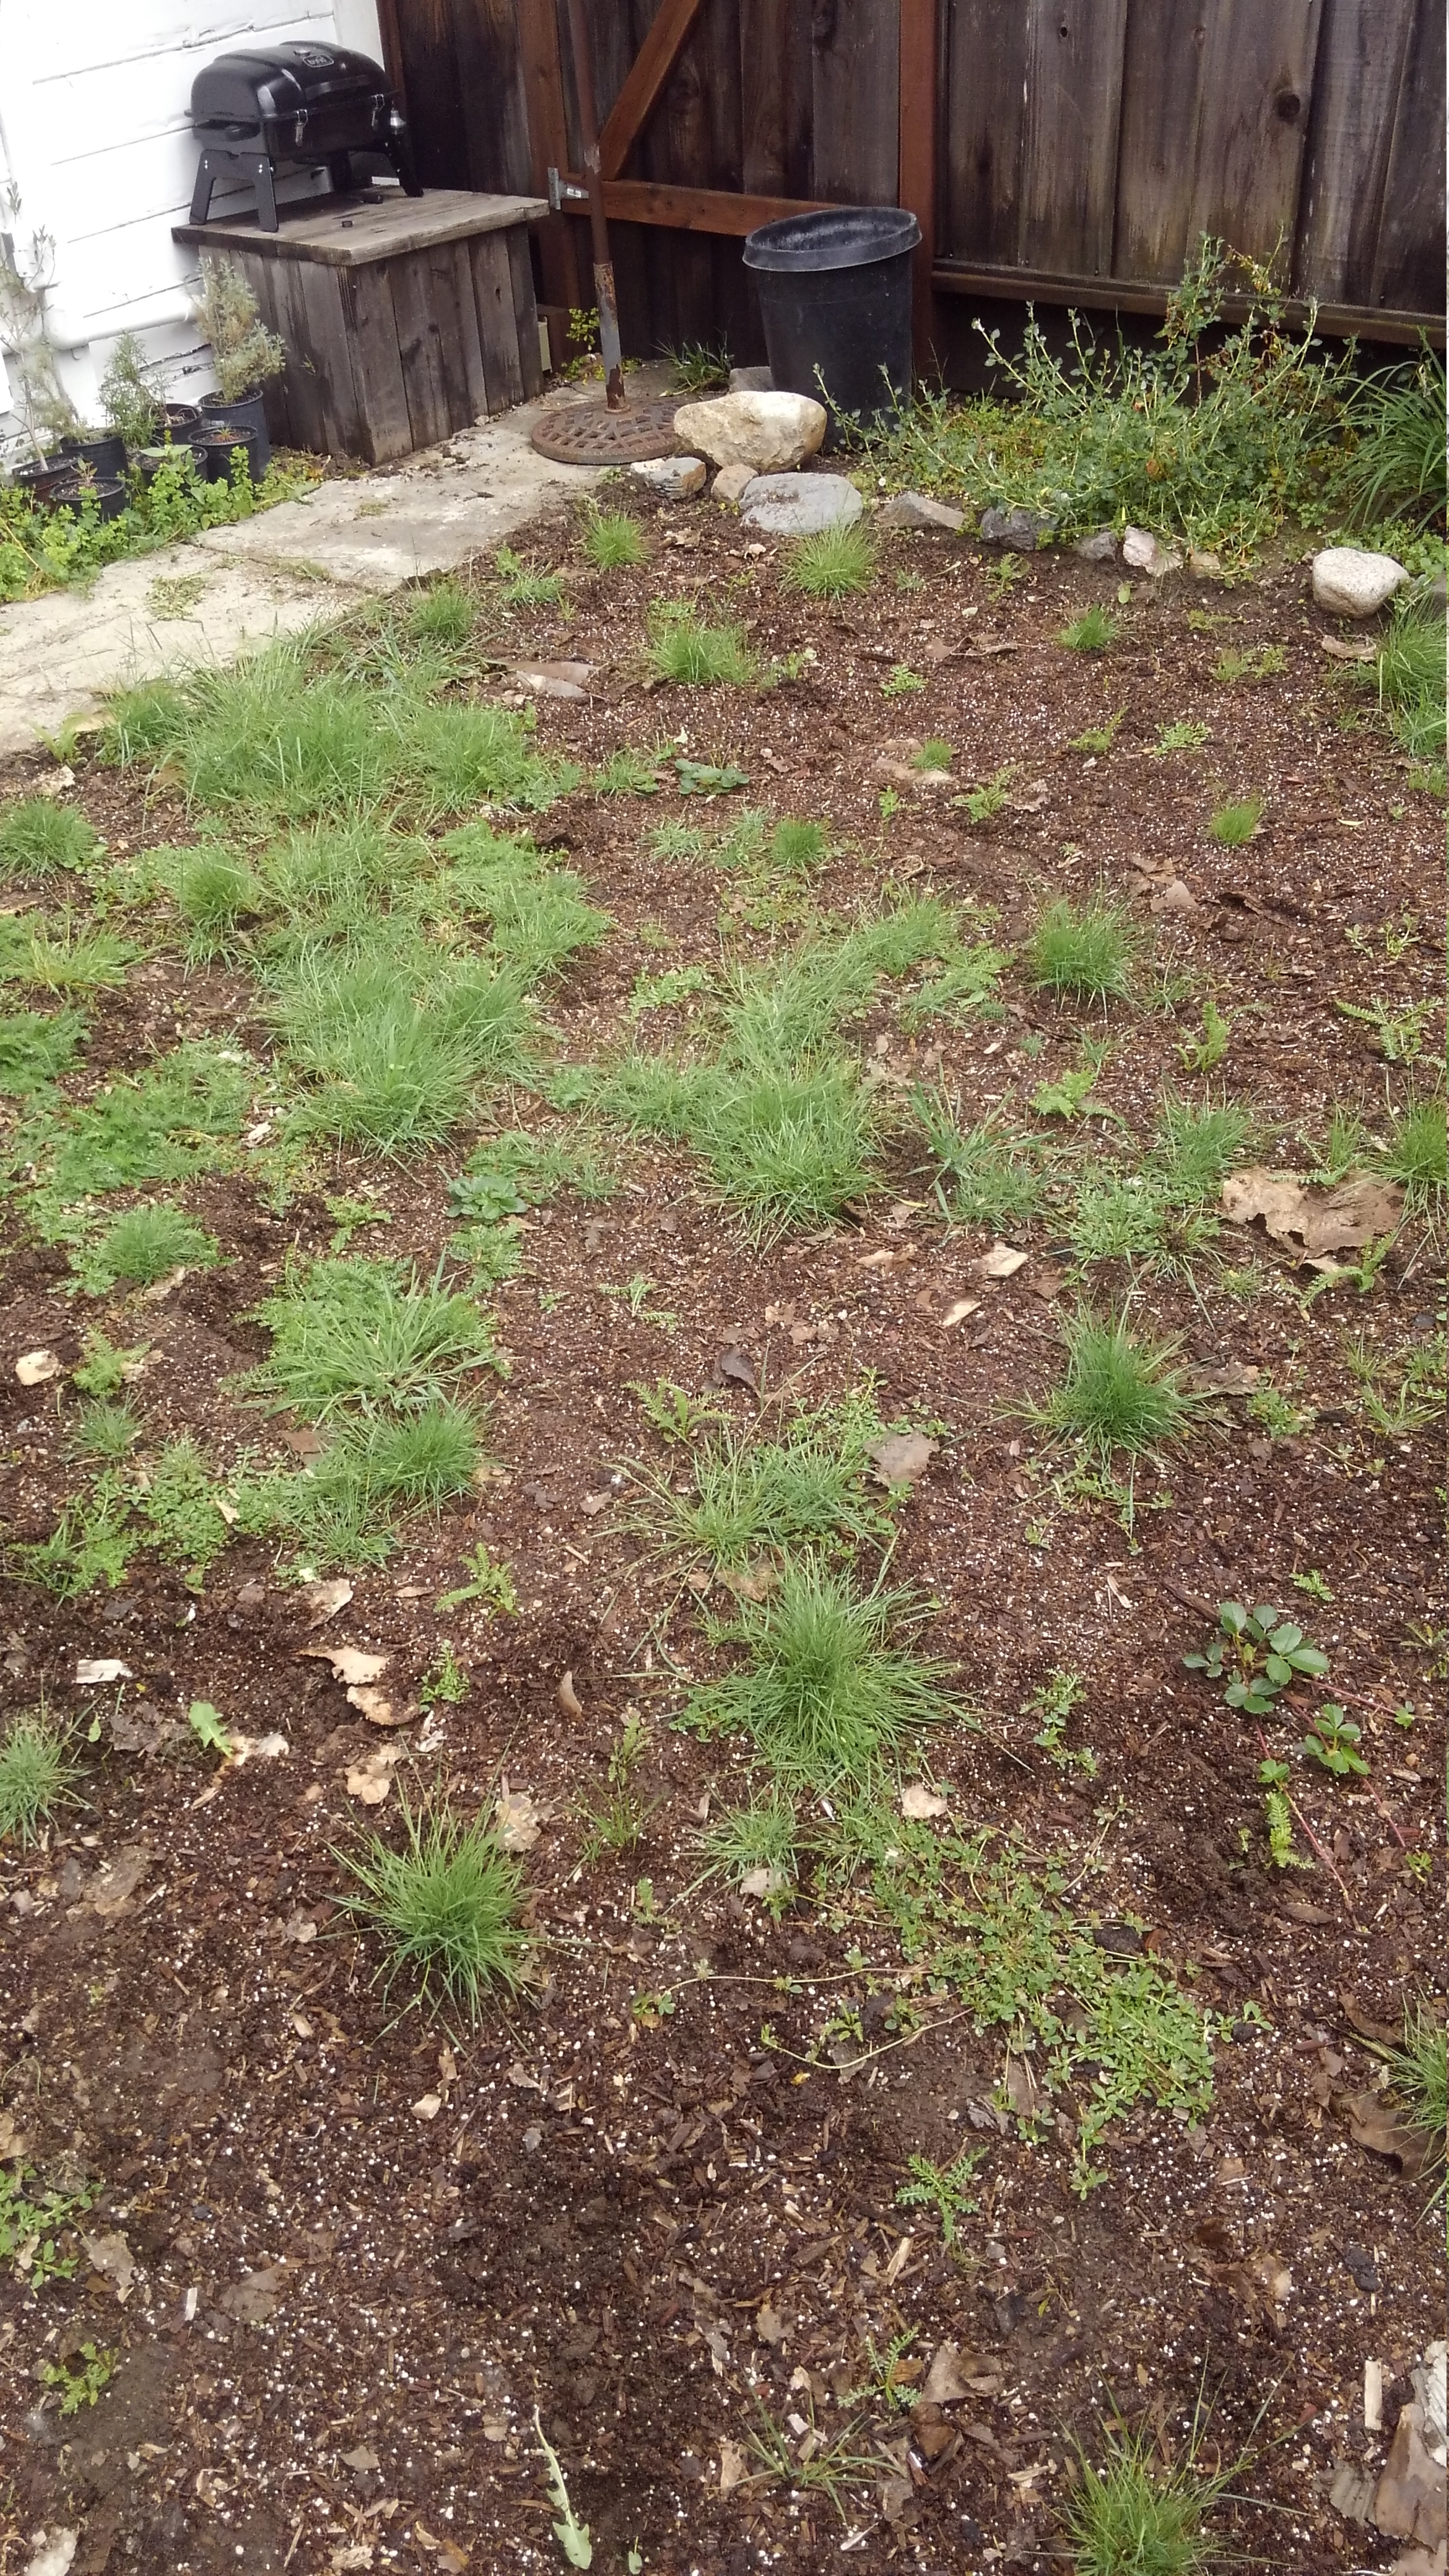 The stages of replacing the lawn